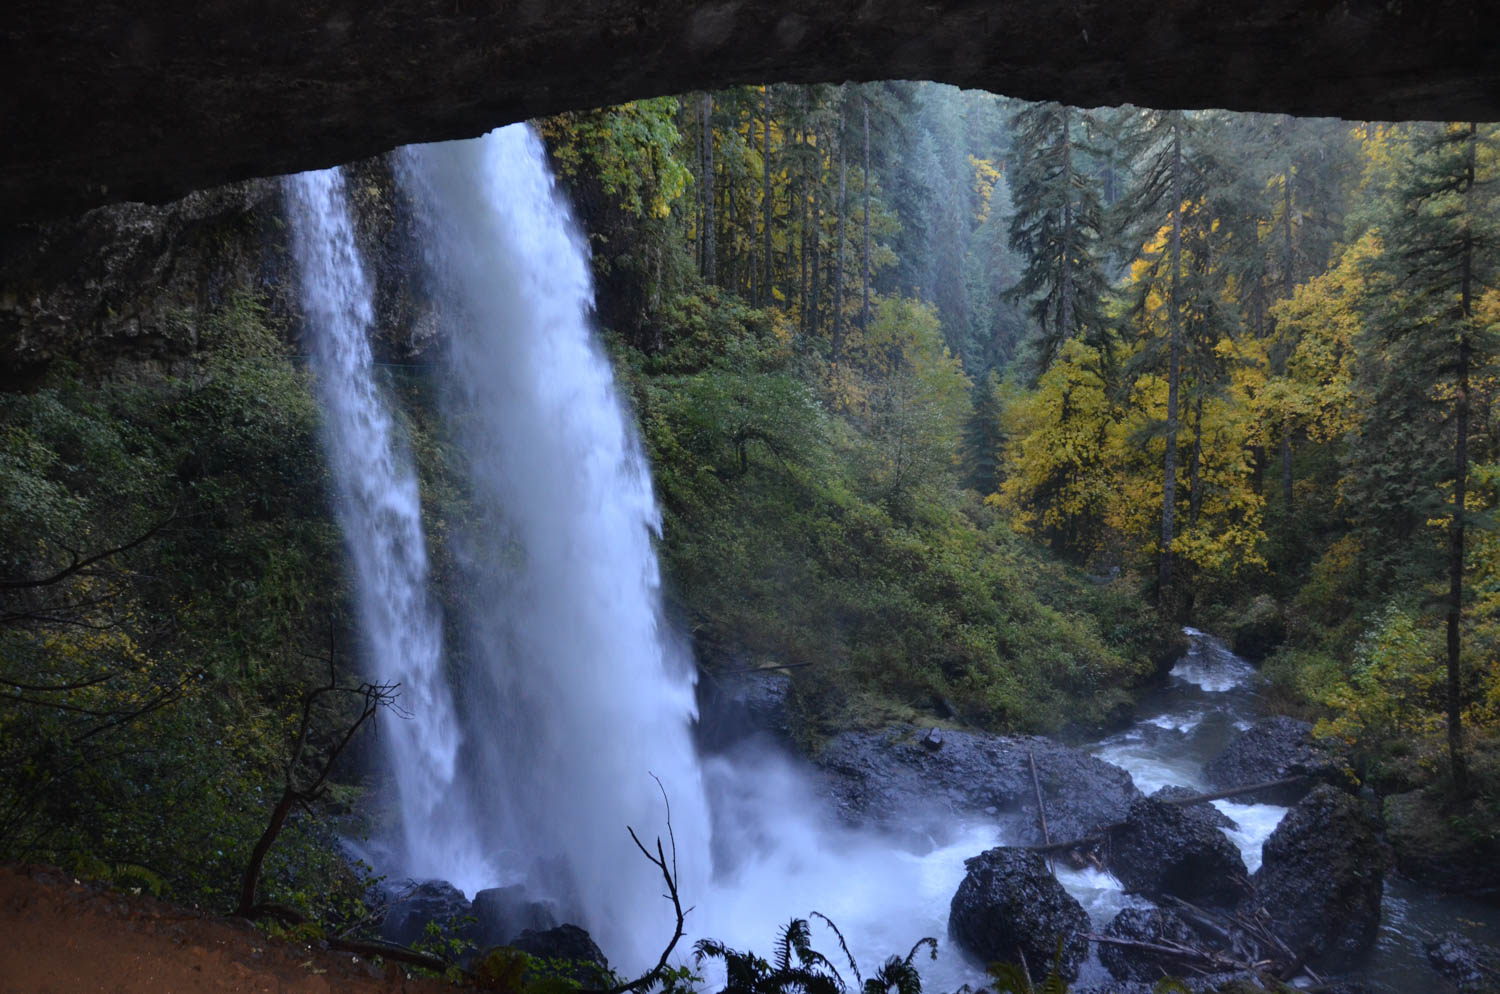 view from behind a waterfall at silver falls state park